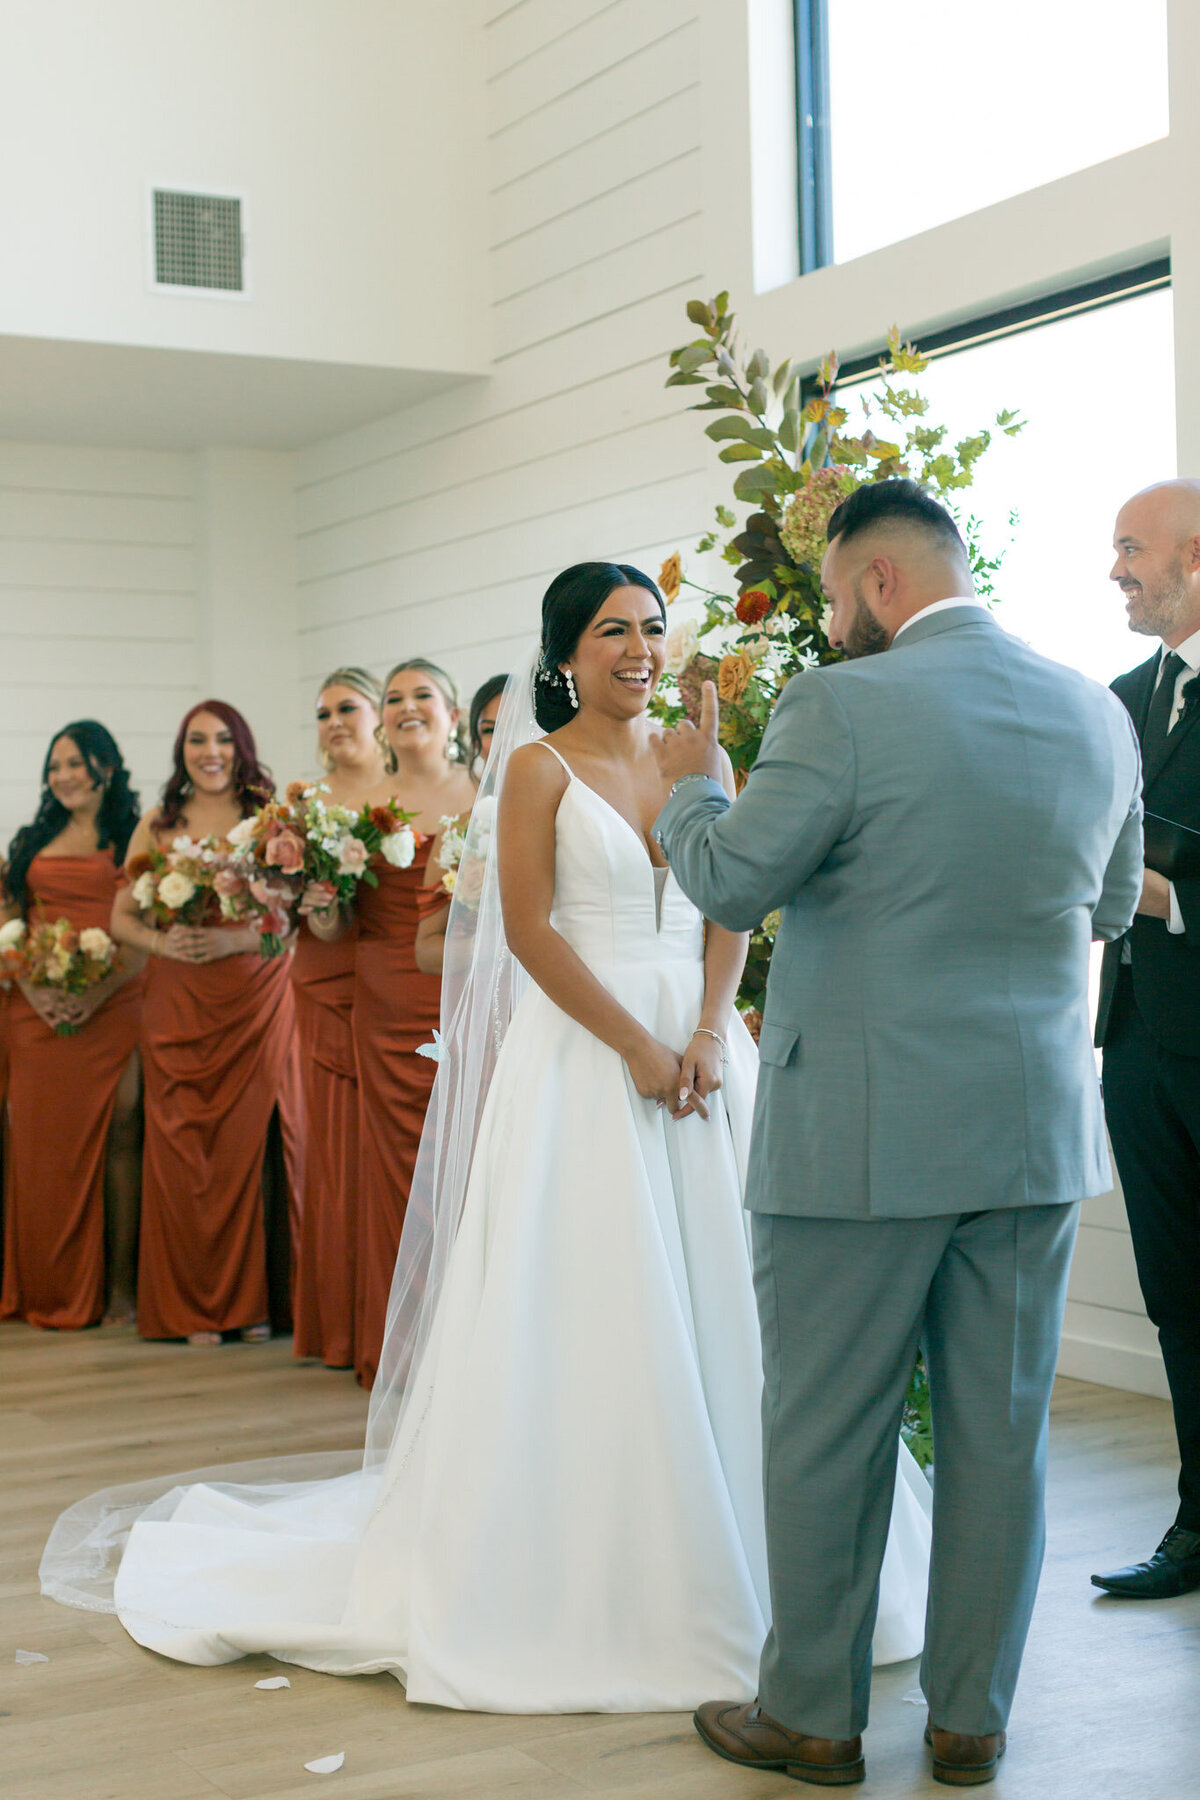 exchange of vows